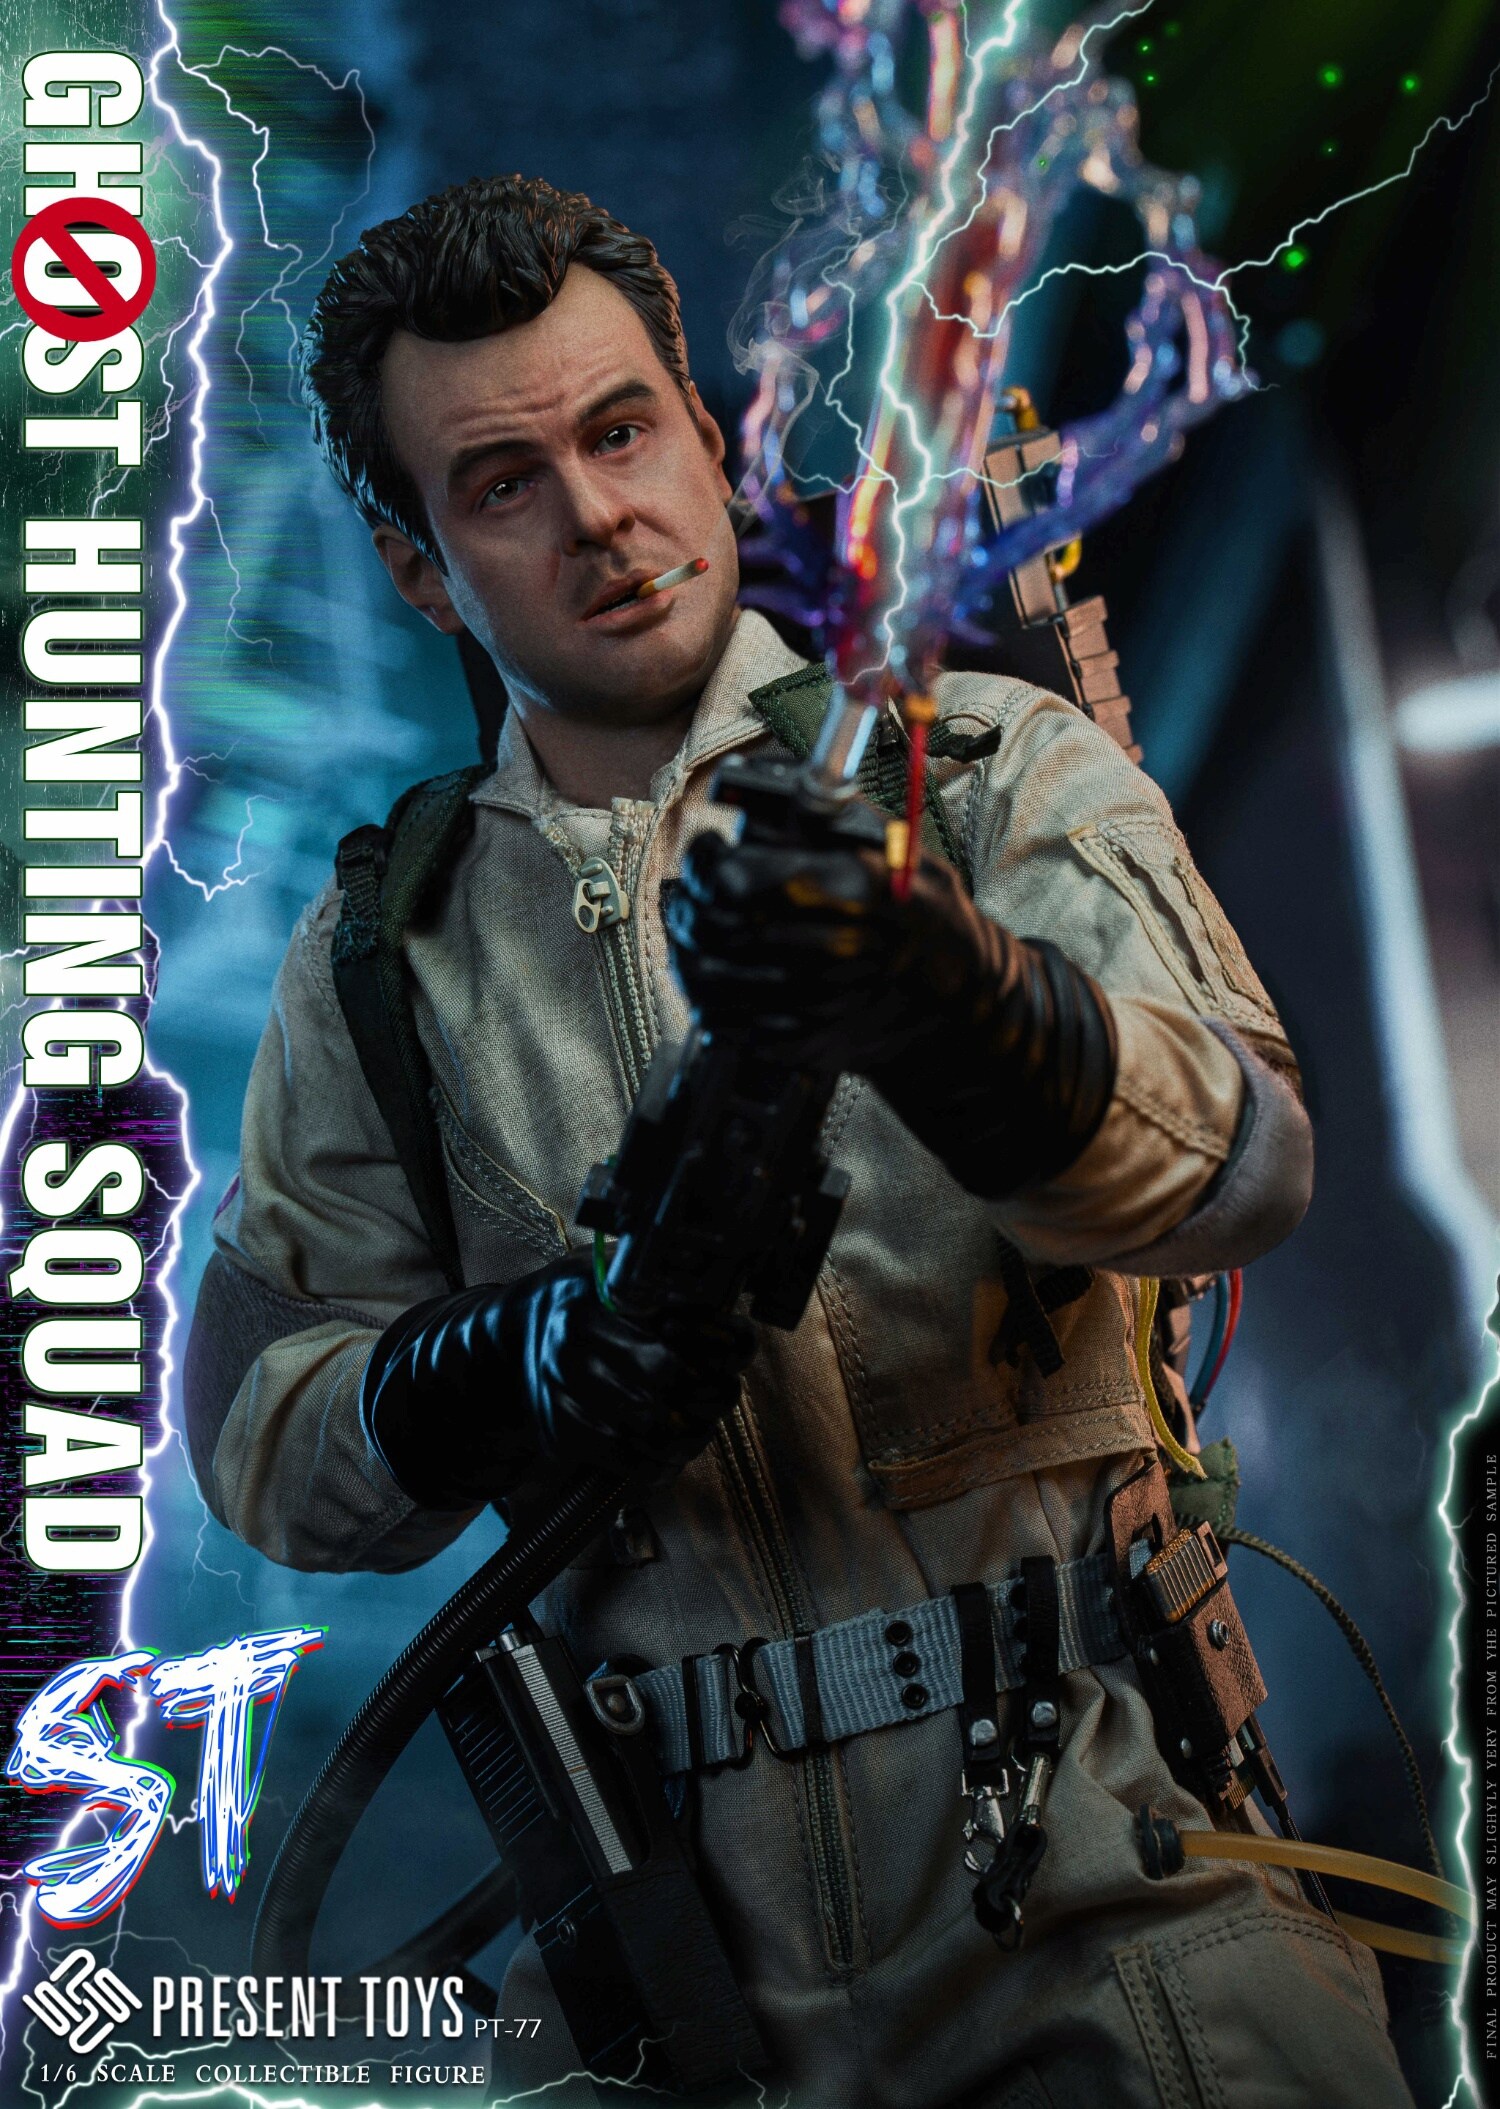 NEW PRODUCT: PRESENT TOYS - Ghostbusters-ST Agent & SP Agent Collection #PT-sp77/PT-sp78 03180